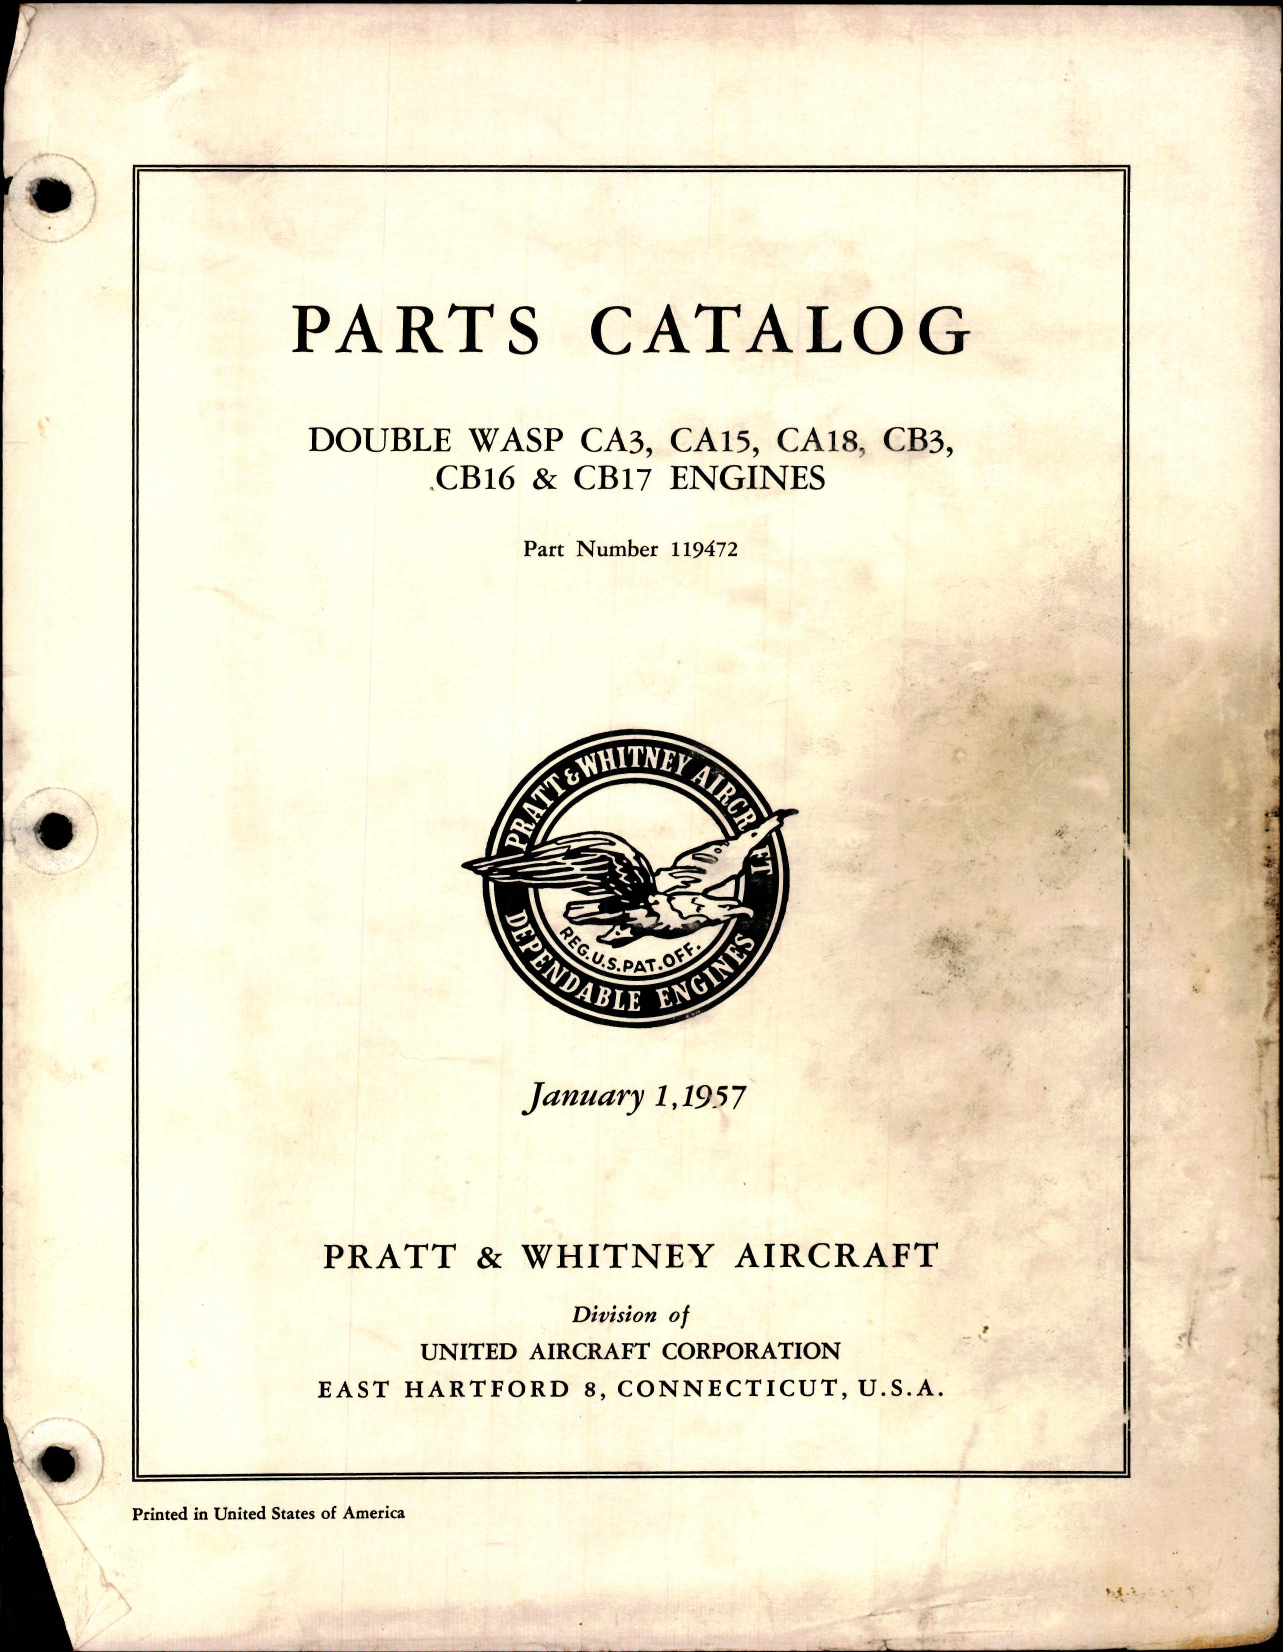 Sample page 1 from AirCorps Library document: Parts Catalog for Double Wasp CA3, CA15, CA18, CB3, CB16 & CB17 Engines